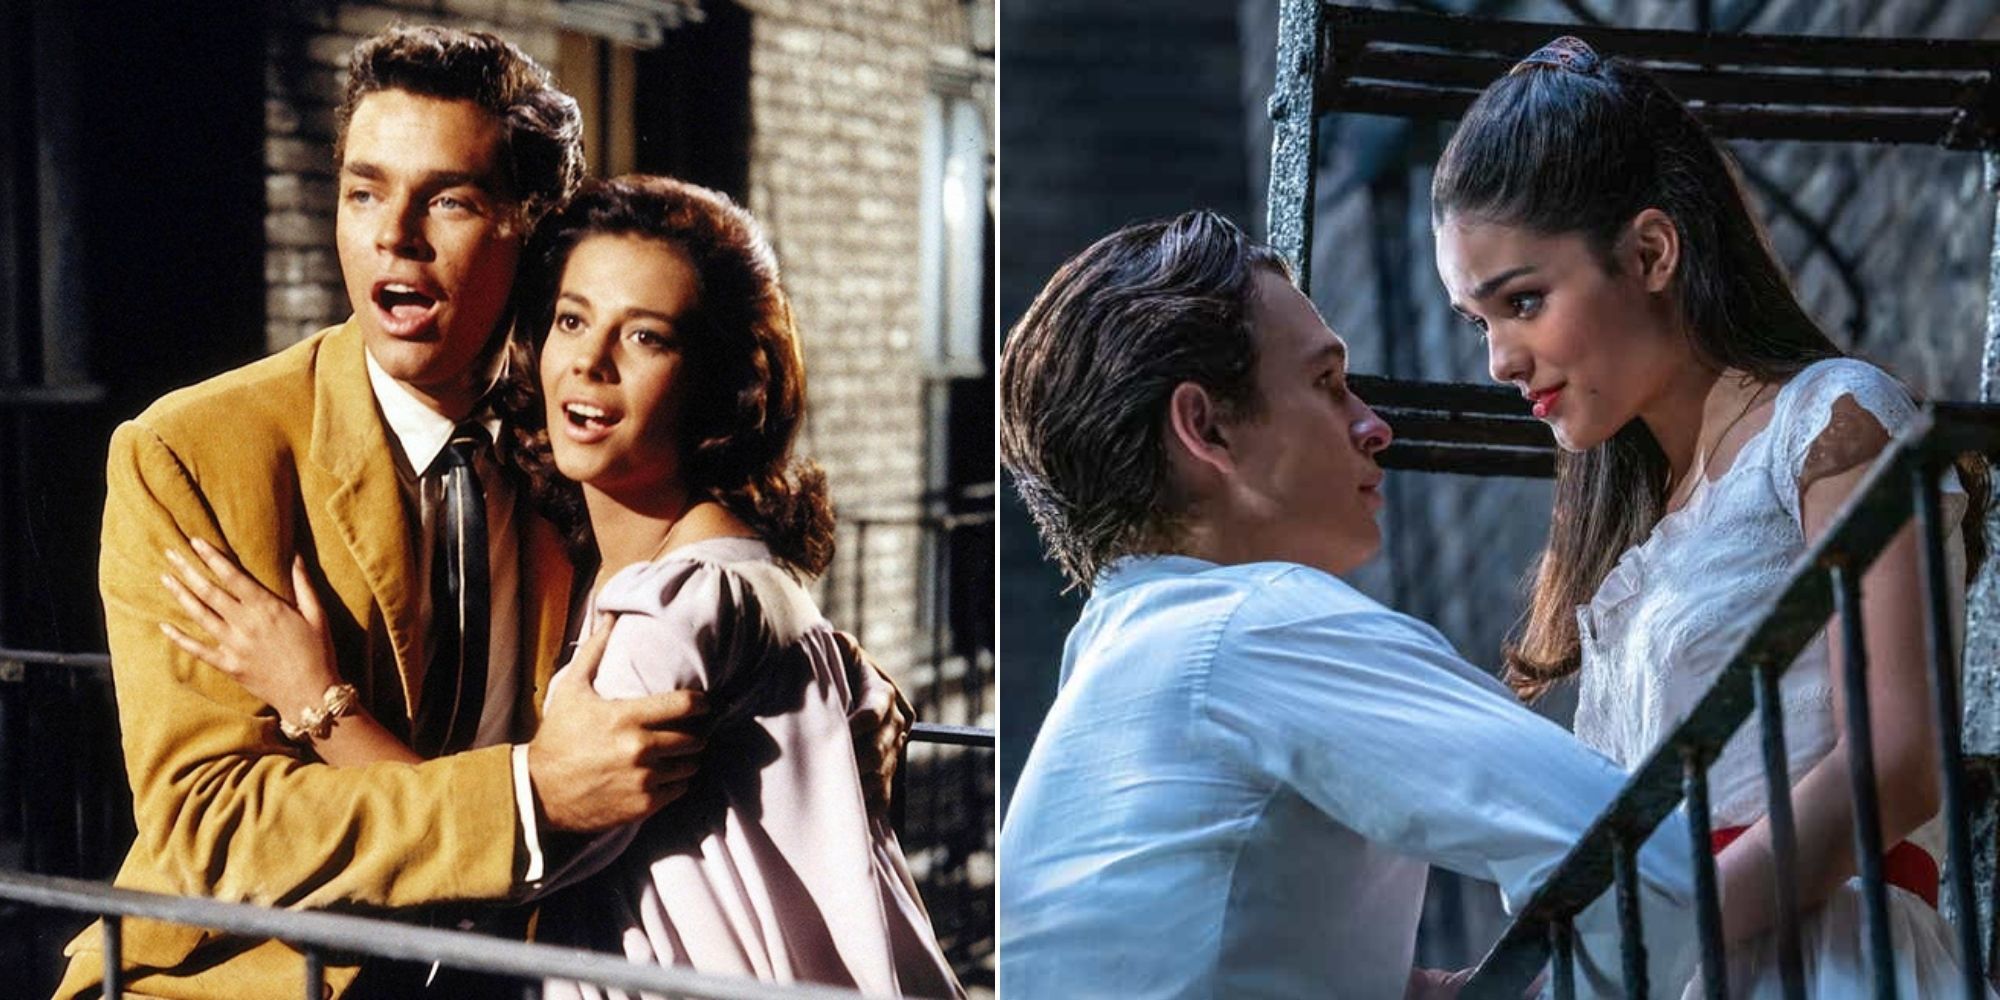 Maria and Tony in West Side Story 1961 and 2021